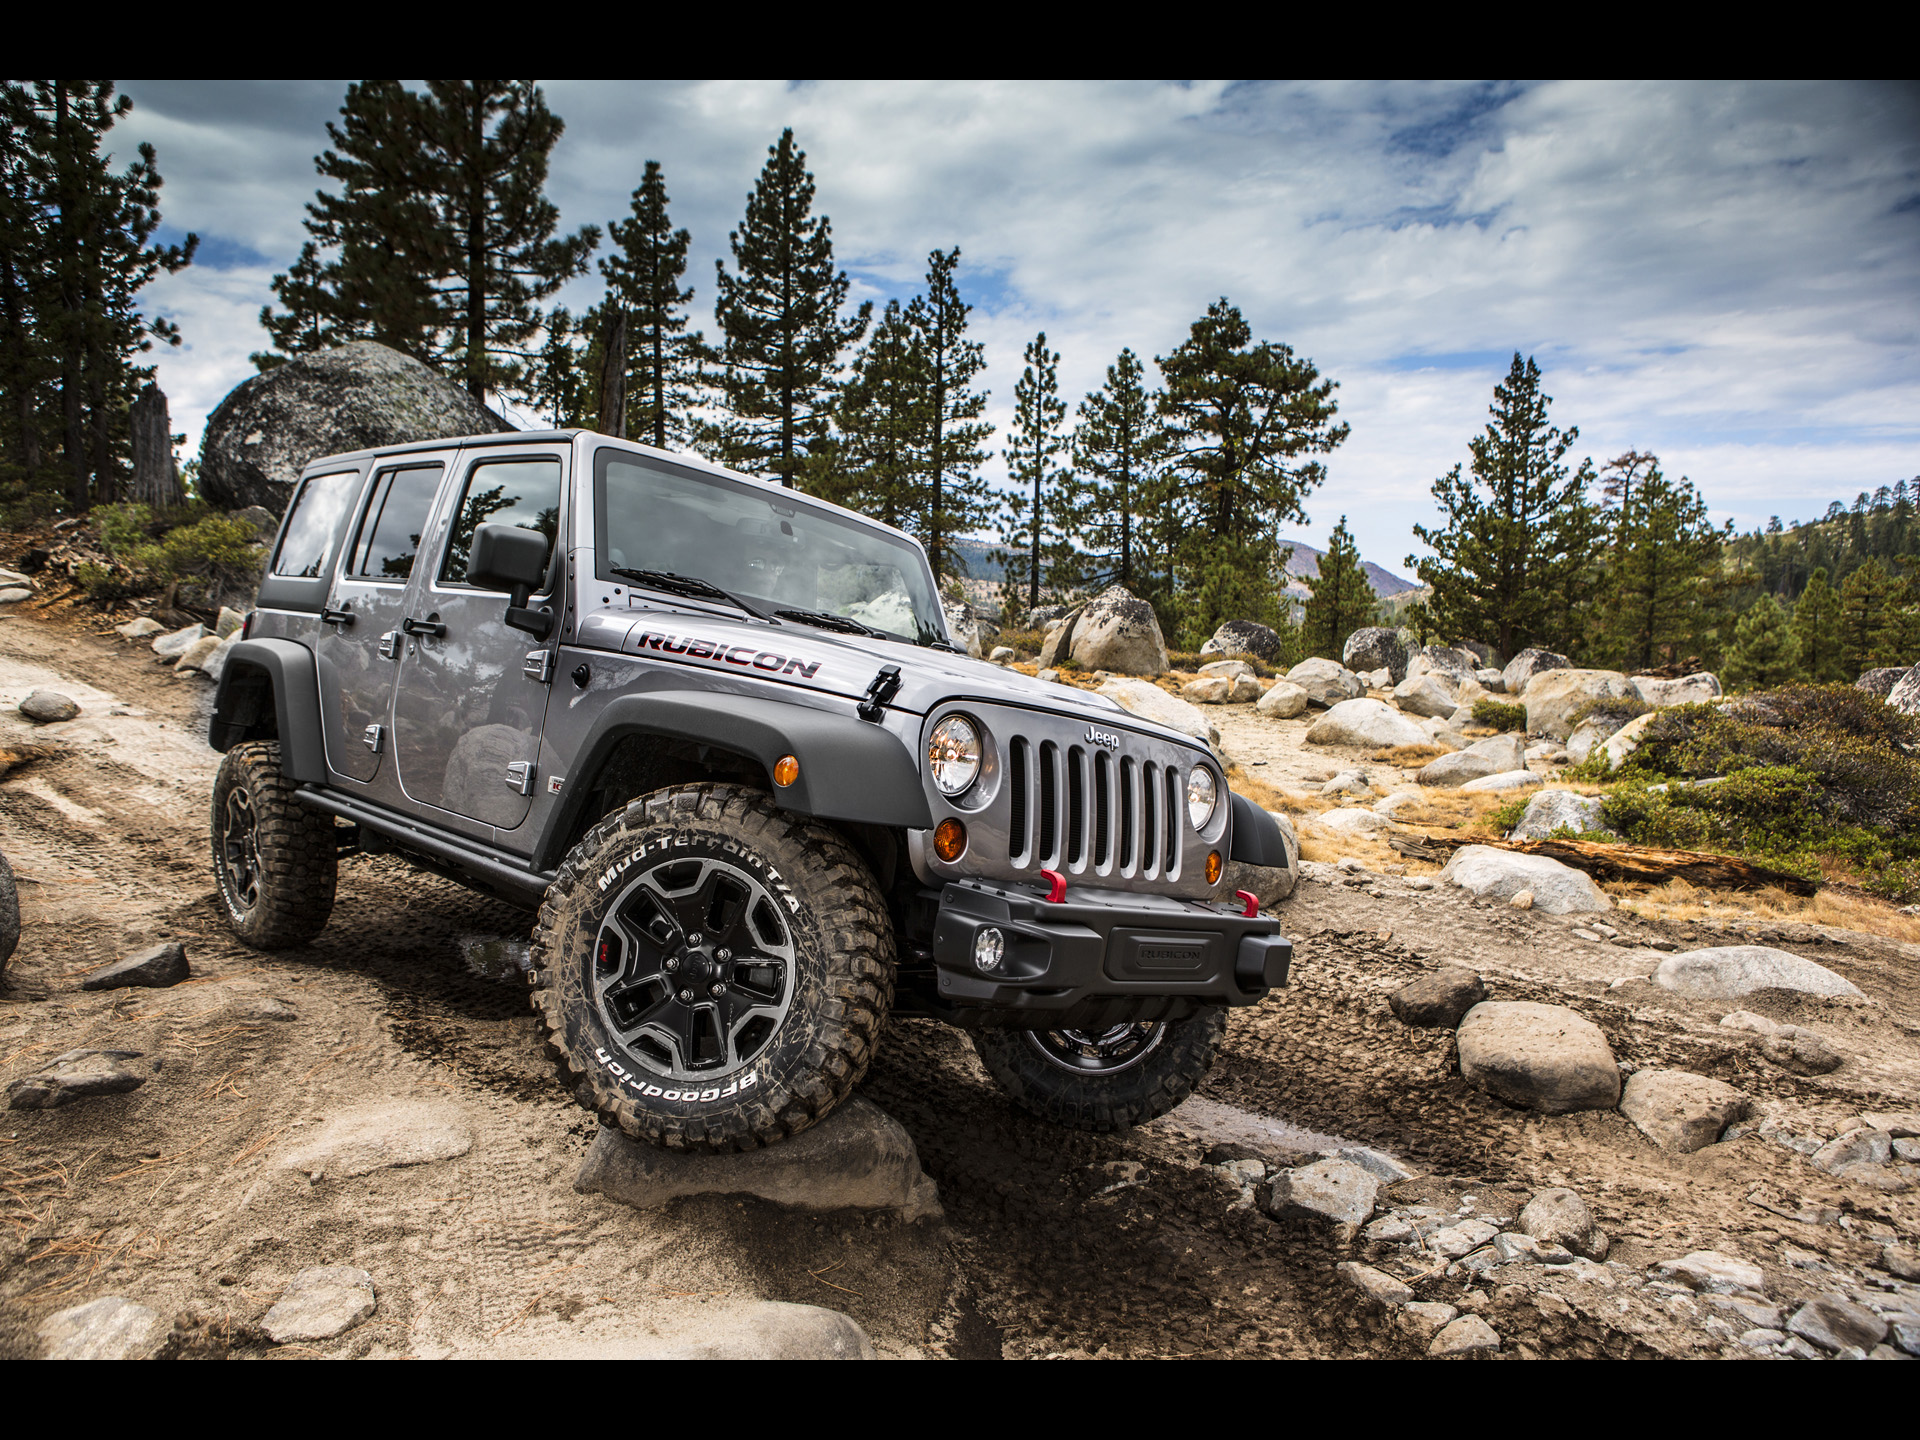 Jeep Wrangler Unlimited Rubicon Wallpaper | AUTOMOTIVE REVIEW SITES